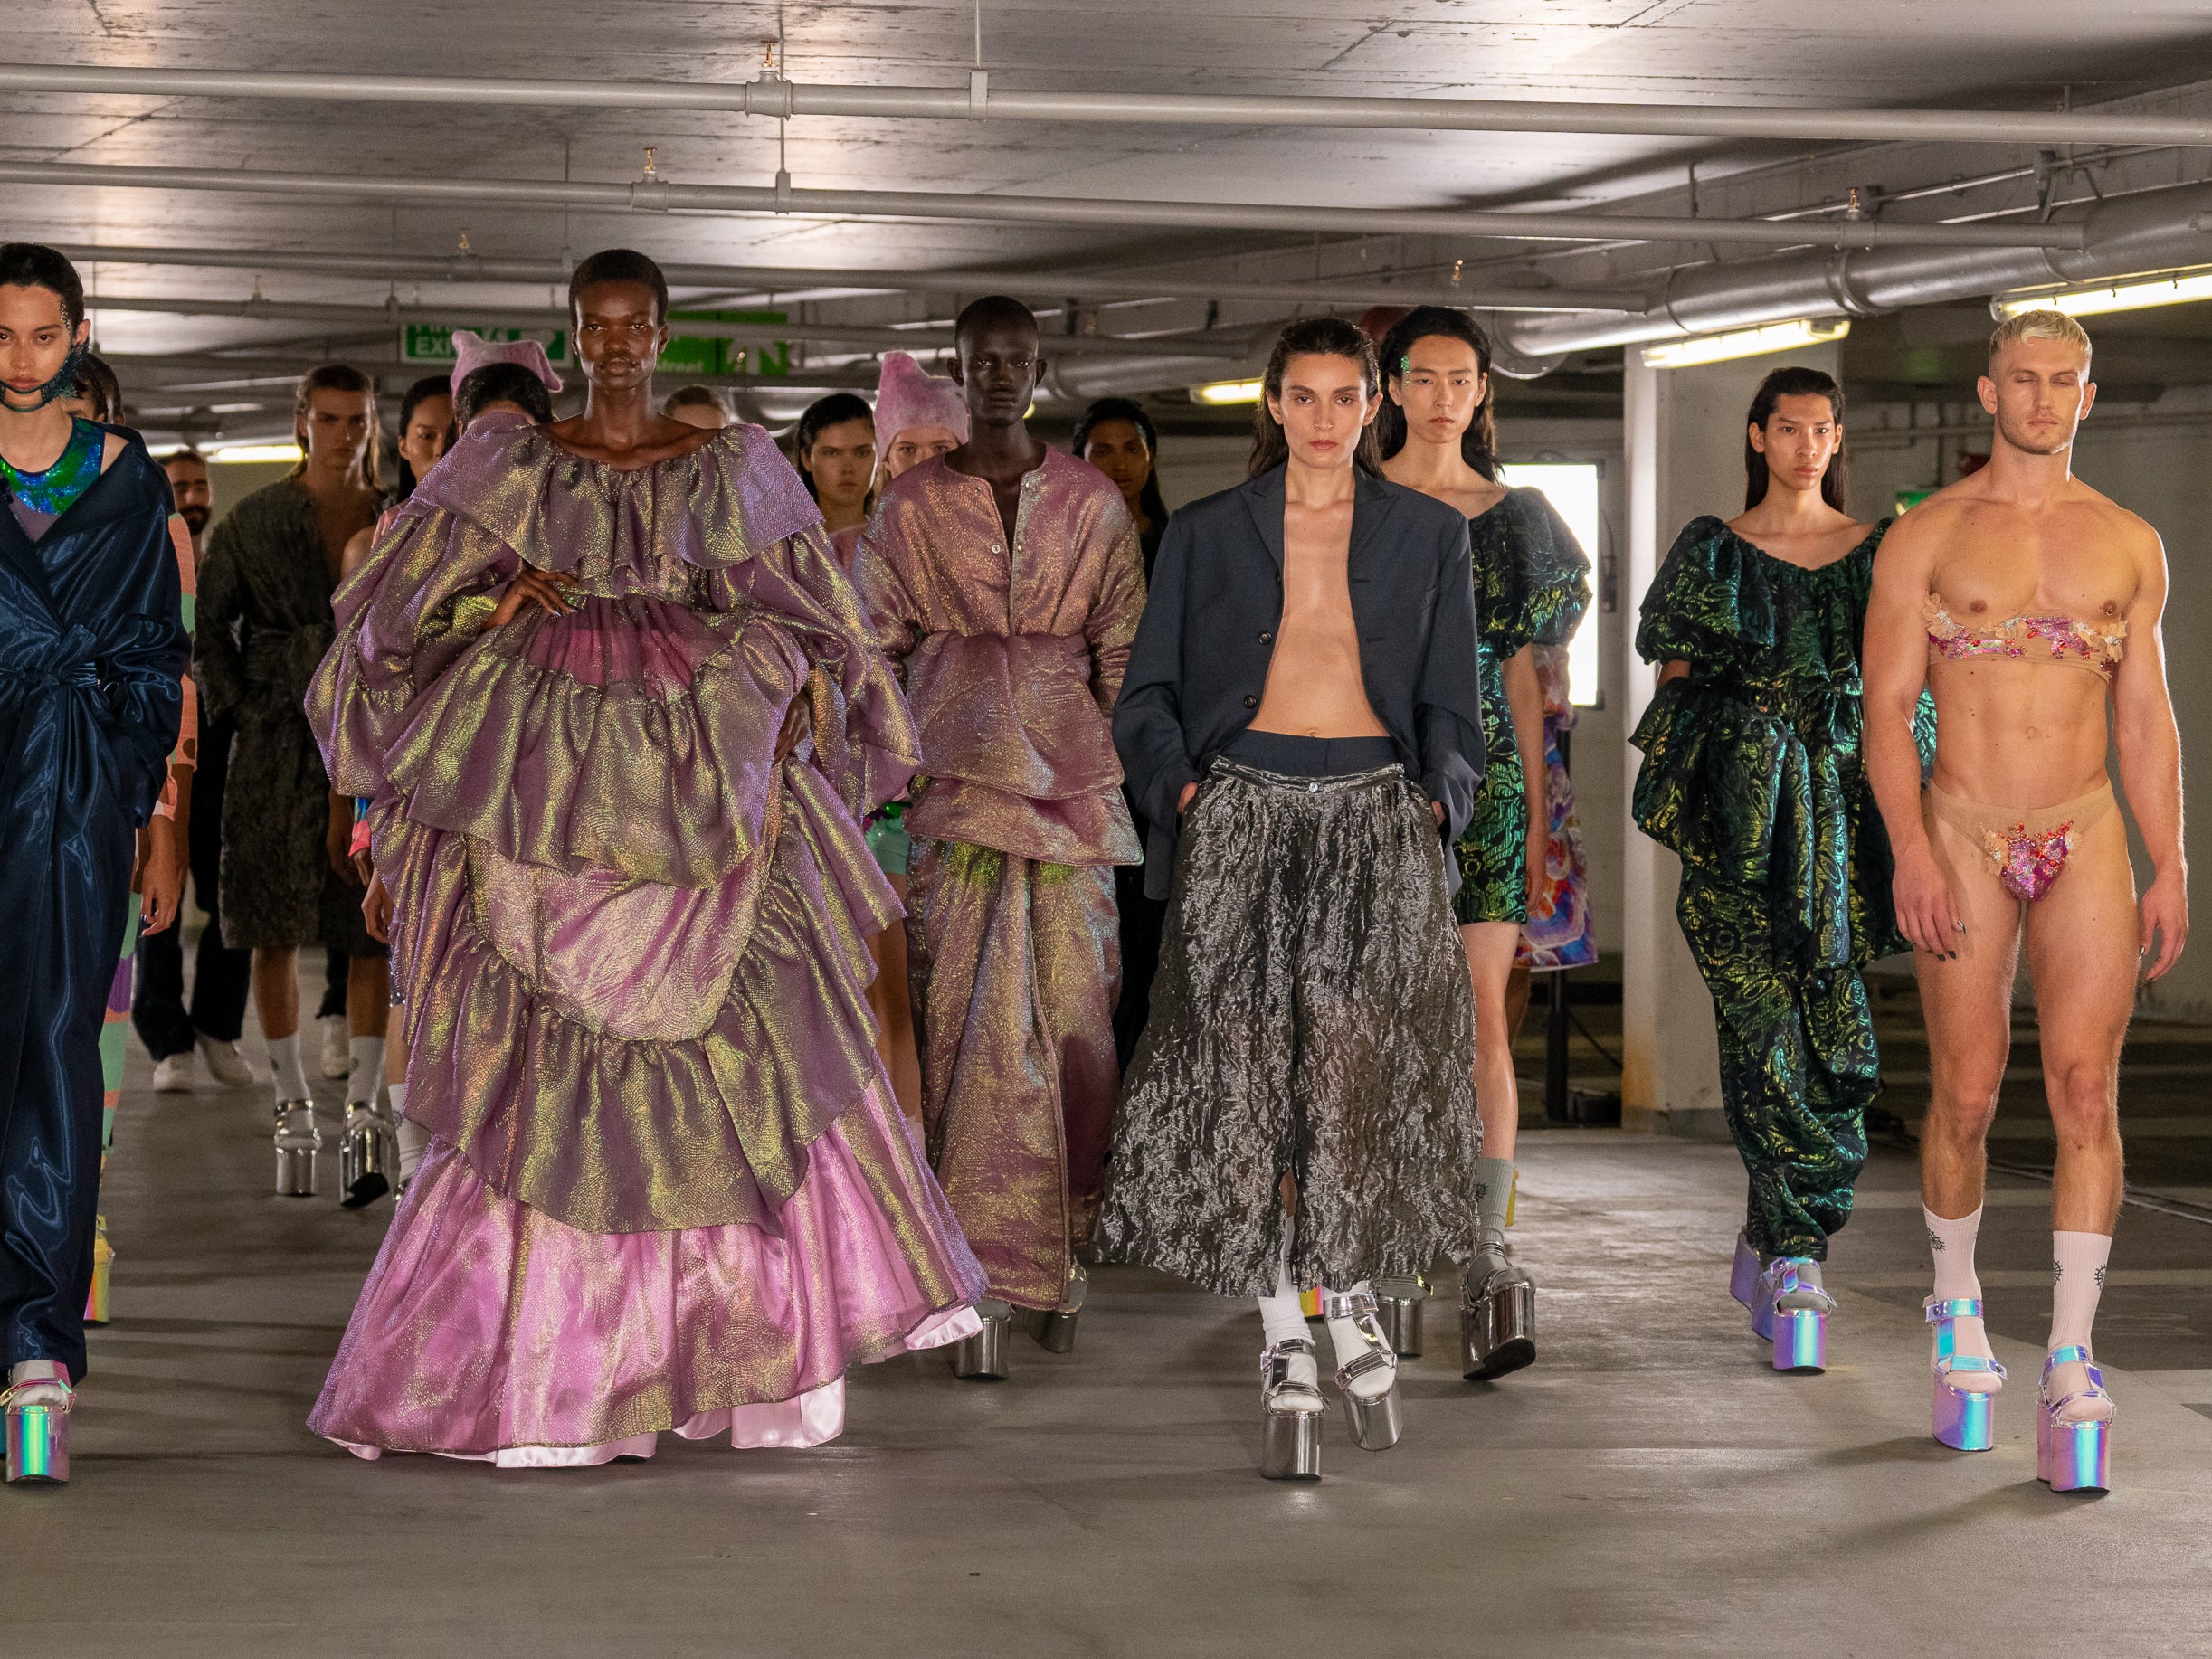 Edward Crutchley’s show, three storeys deep in an echoey car park, showcased his mastery of fabric